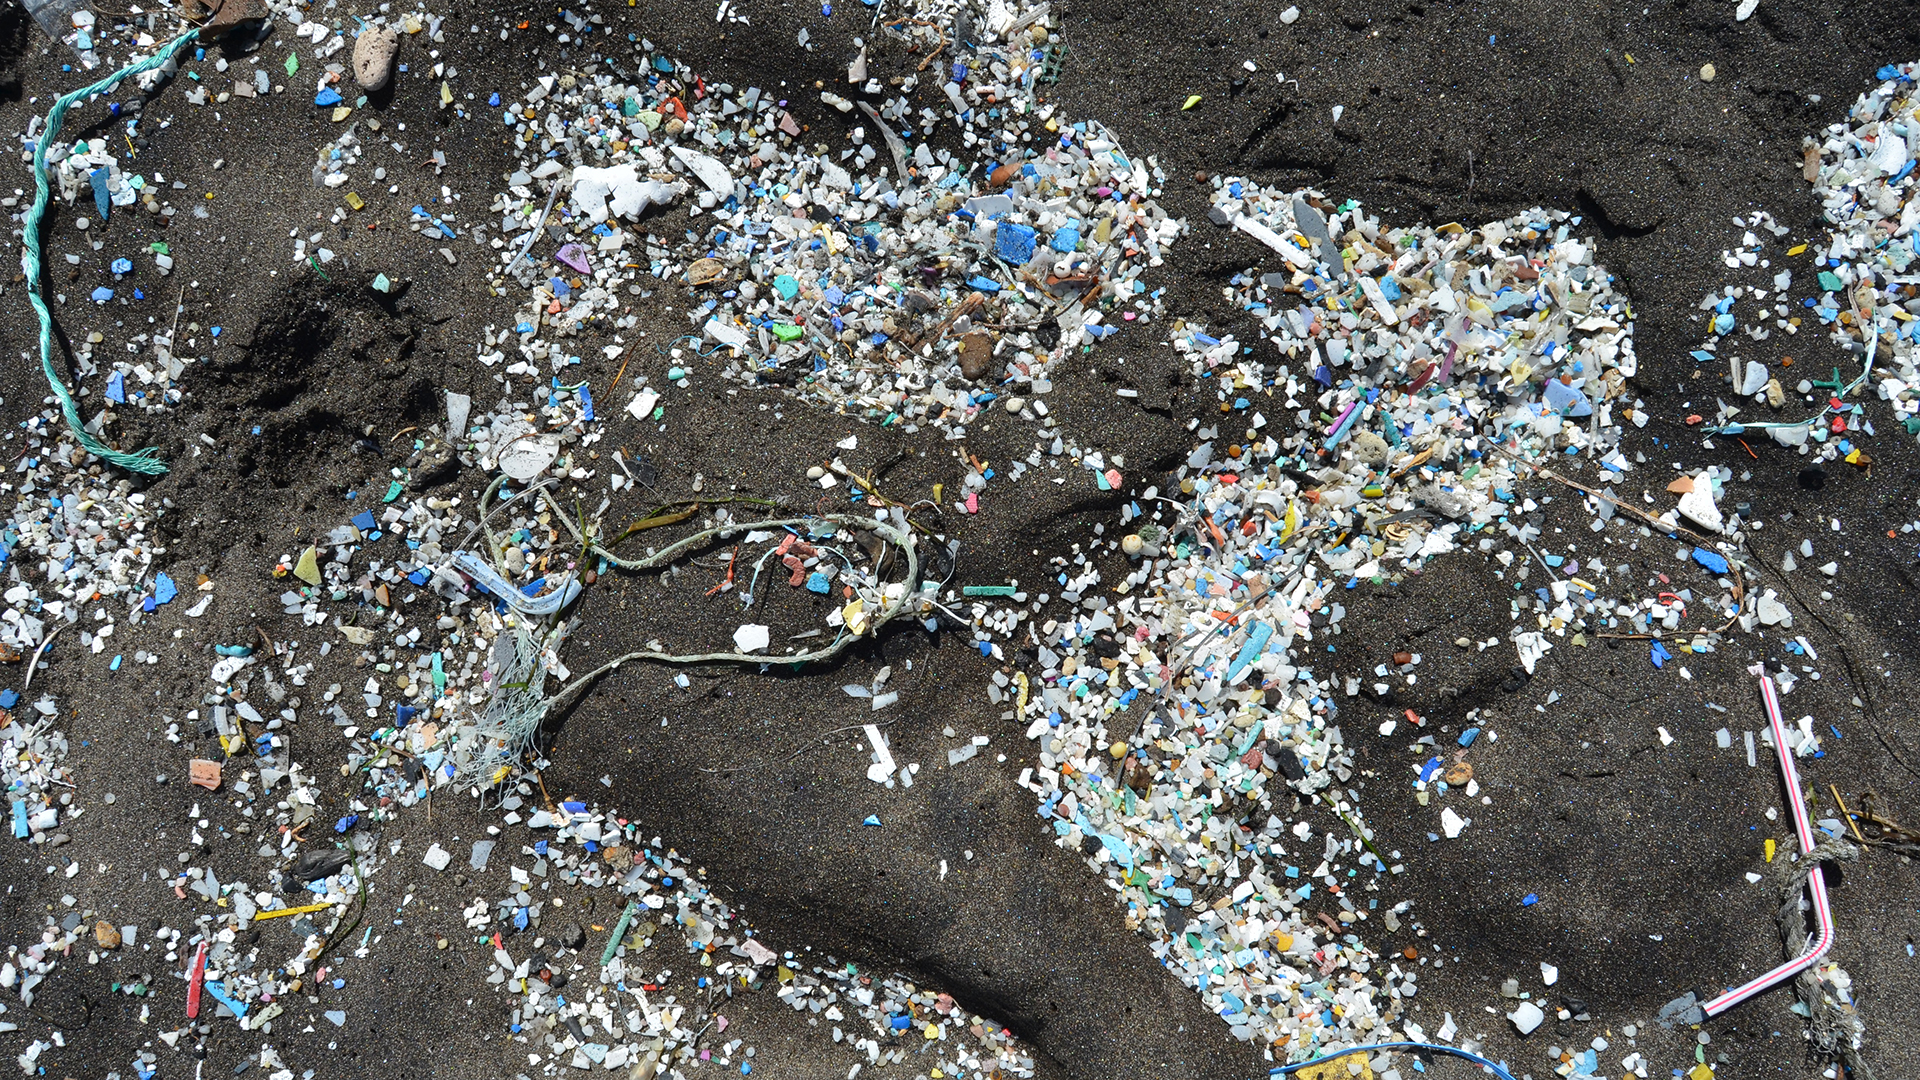 This image shows a close up photo of a dark brown beach that is littered with microplastic (lots and lots of small pieces of colorful plastic strewn about like confetti).